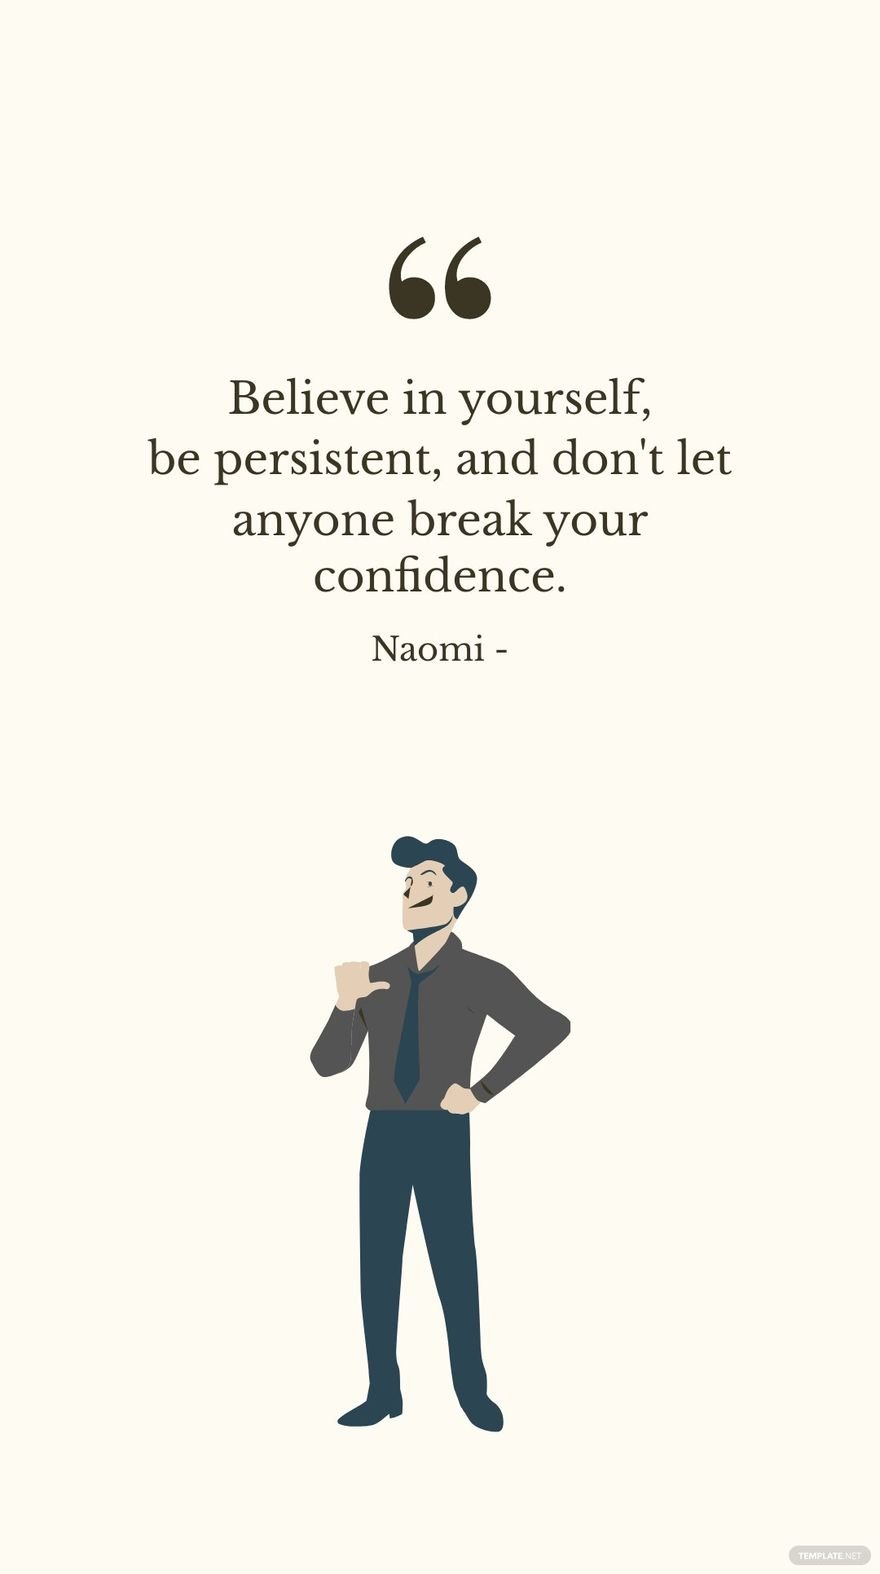 Naomi - Believe in yourself, be persistent, and don't let anyone break your confidence.